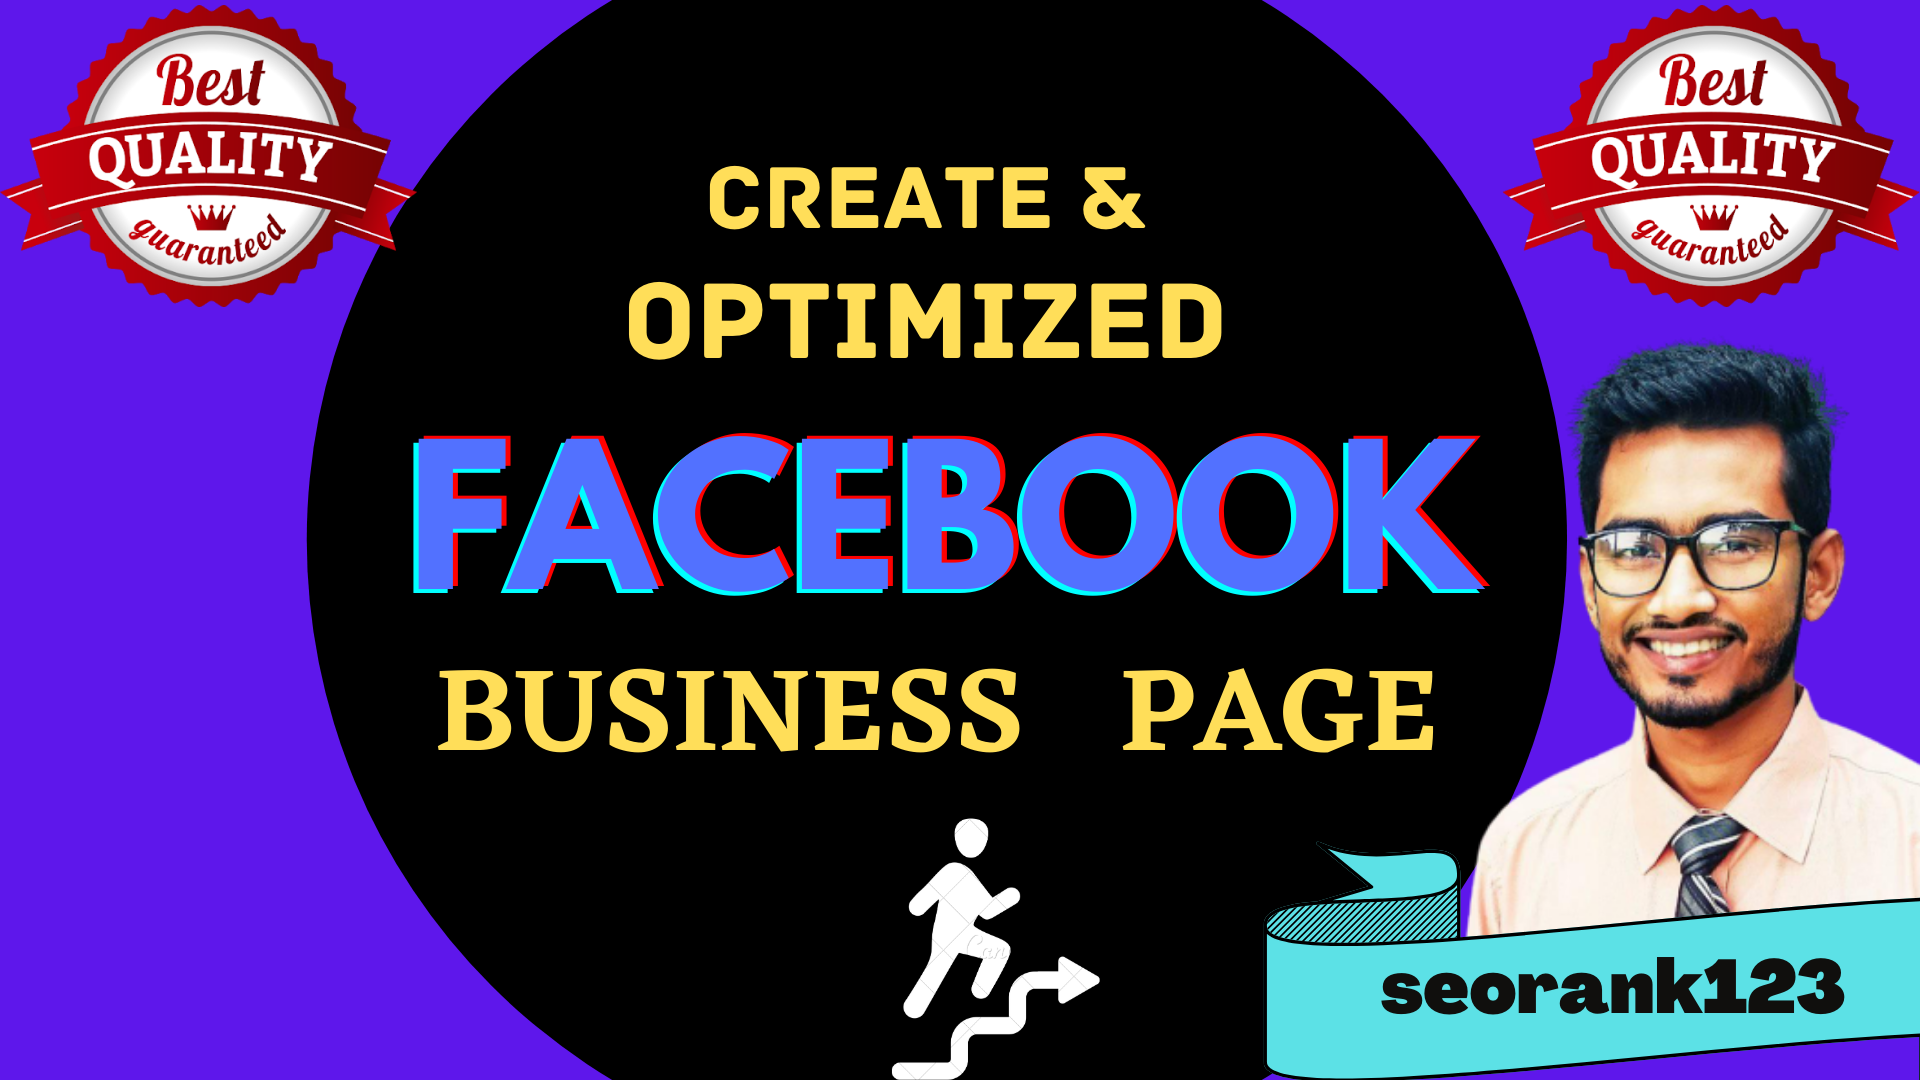 16437I will create and optimize your Facebook business pages